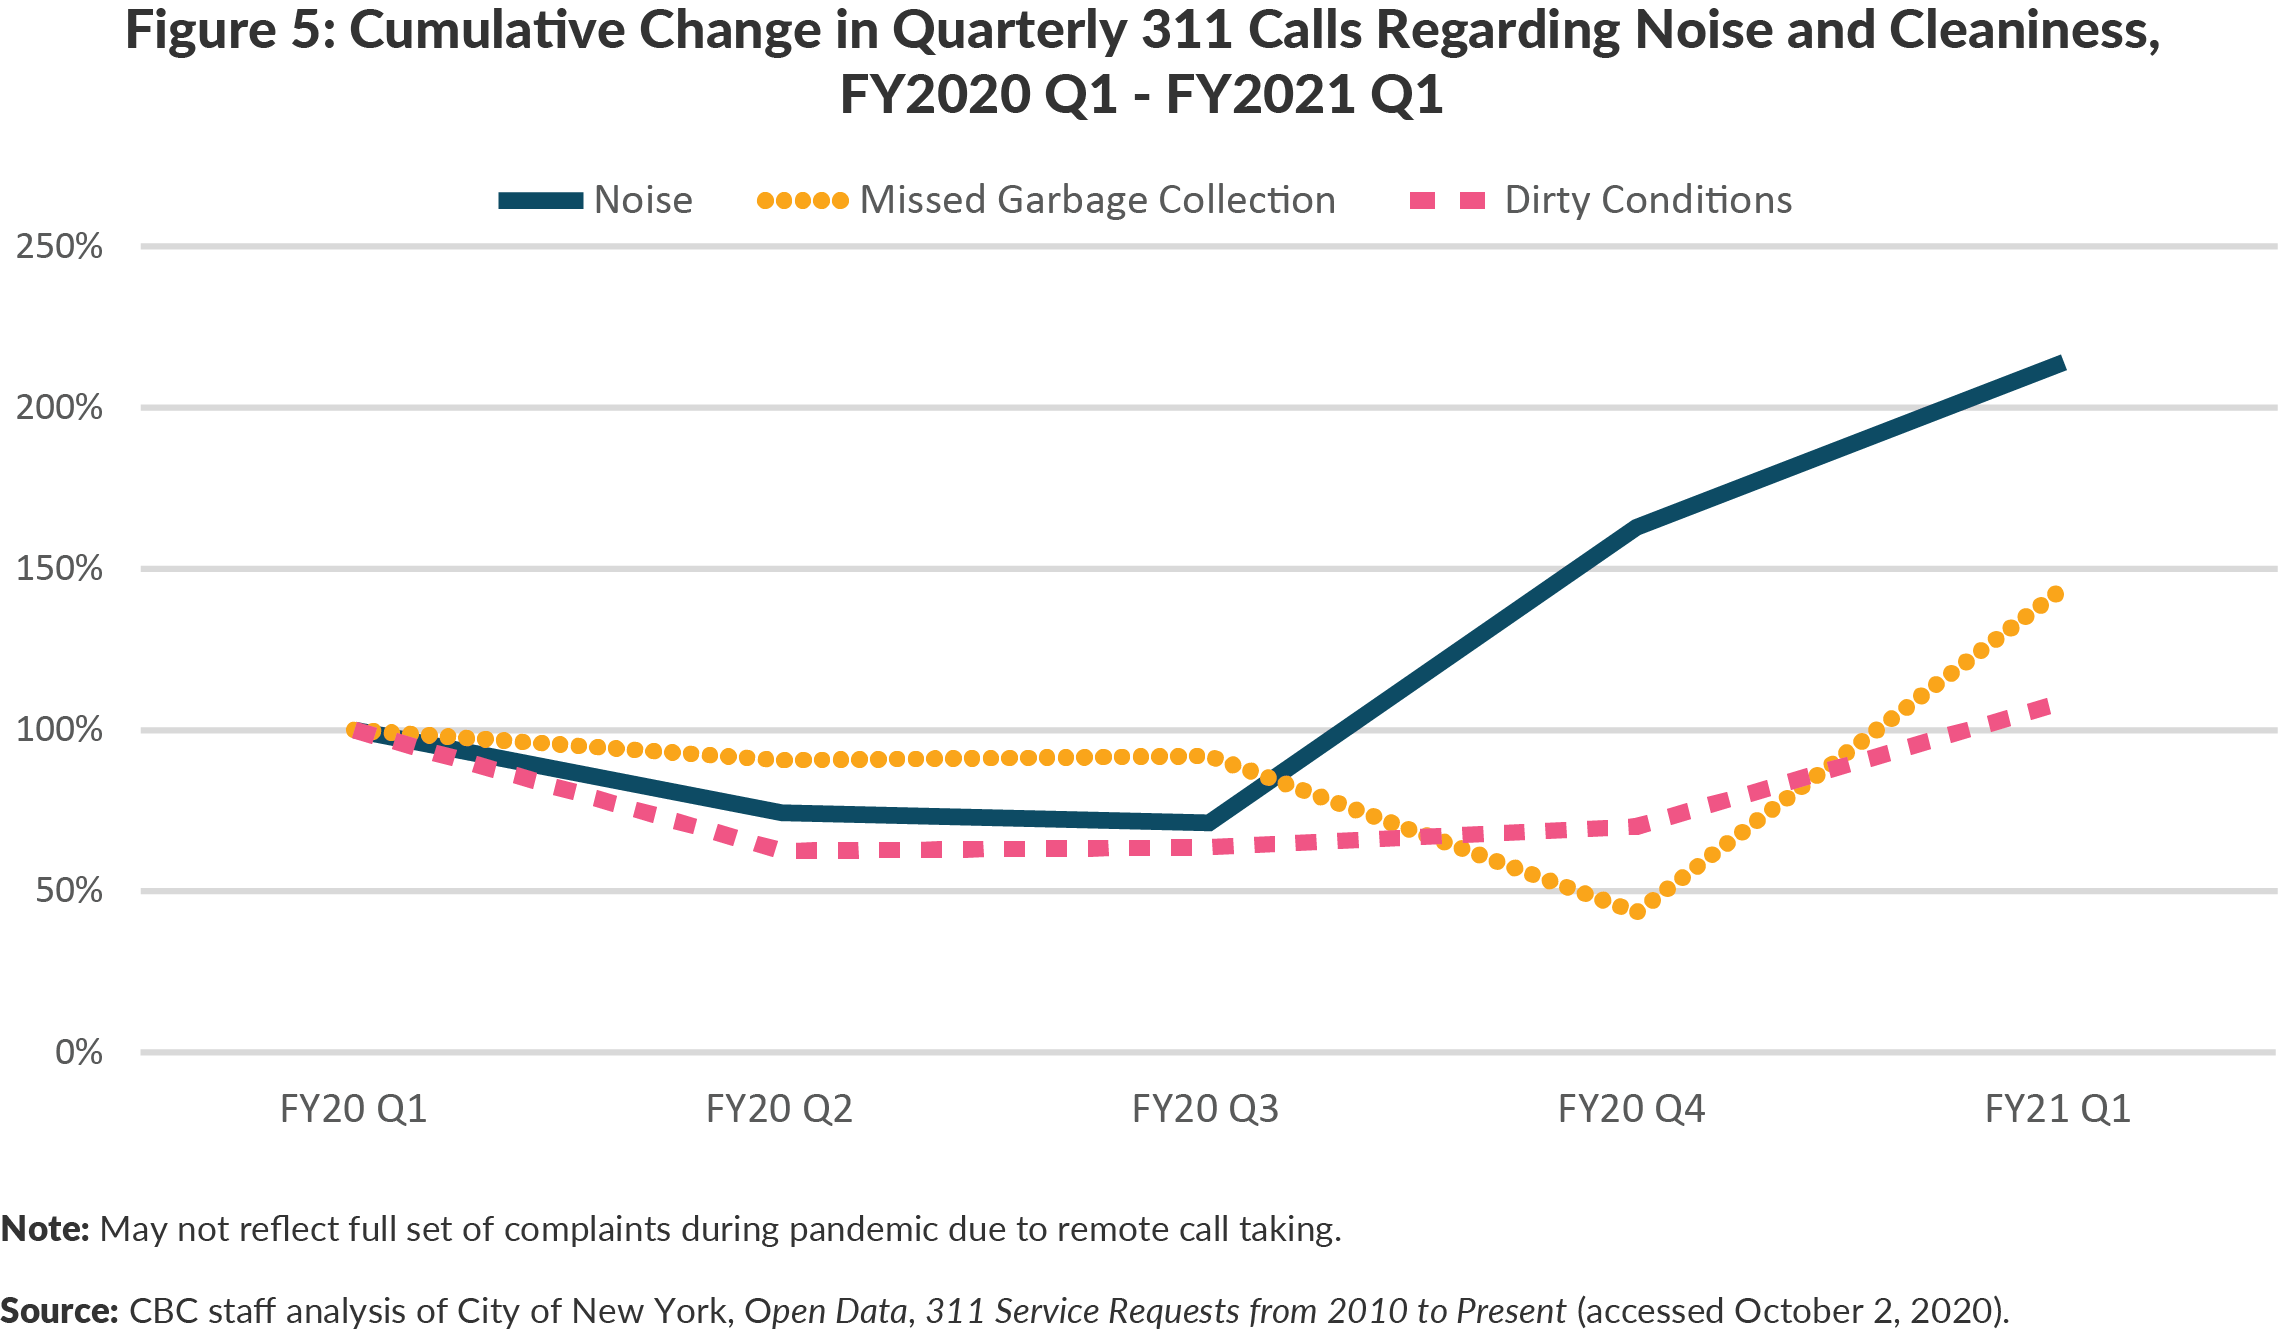 Figure 5: Cumulative Change in Quarterly 311 Calls Regarding Noise and Cleaniness, FY2020 Q1 - FY2021 Q1